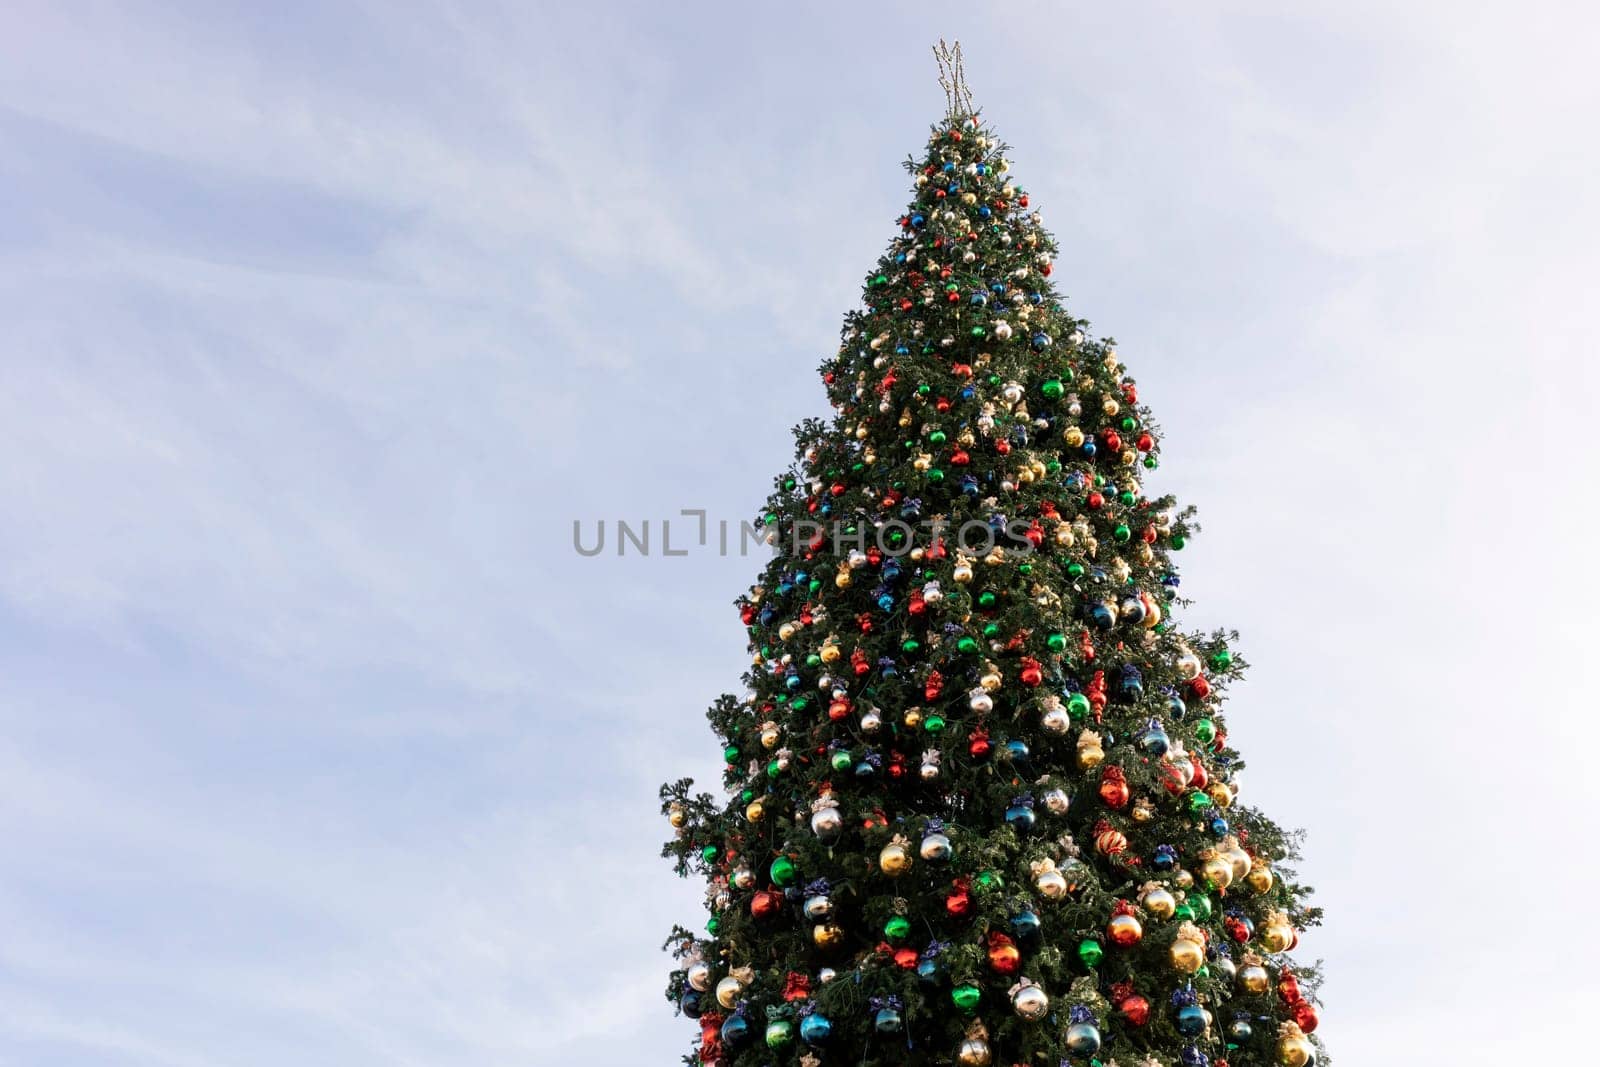 Outdoor Decorated Christmas Tree With Big Red, Golden Ball Toys And Star, Blue Sunny Sky On Background. Copy Space For Text. Horizontal Plane. New Year Elegant Pine Tree. Travel And Vacation.